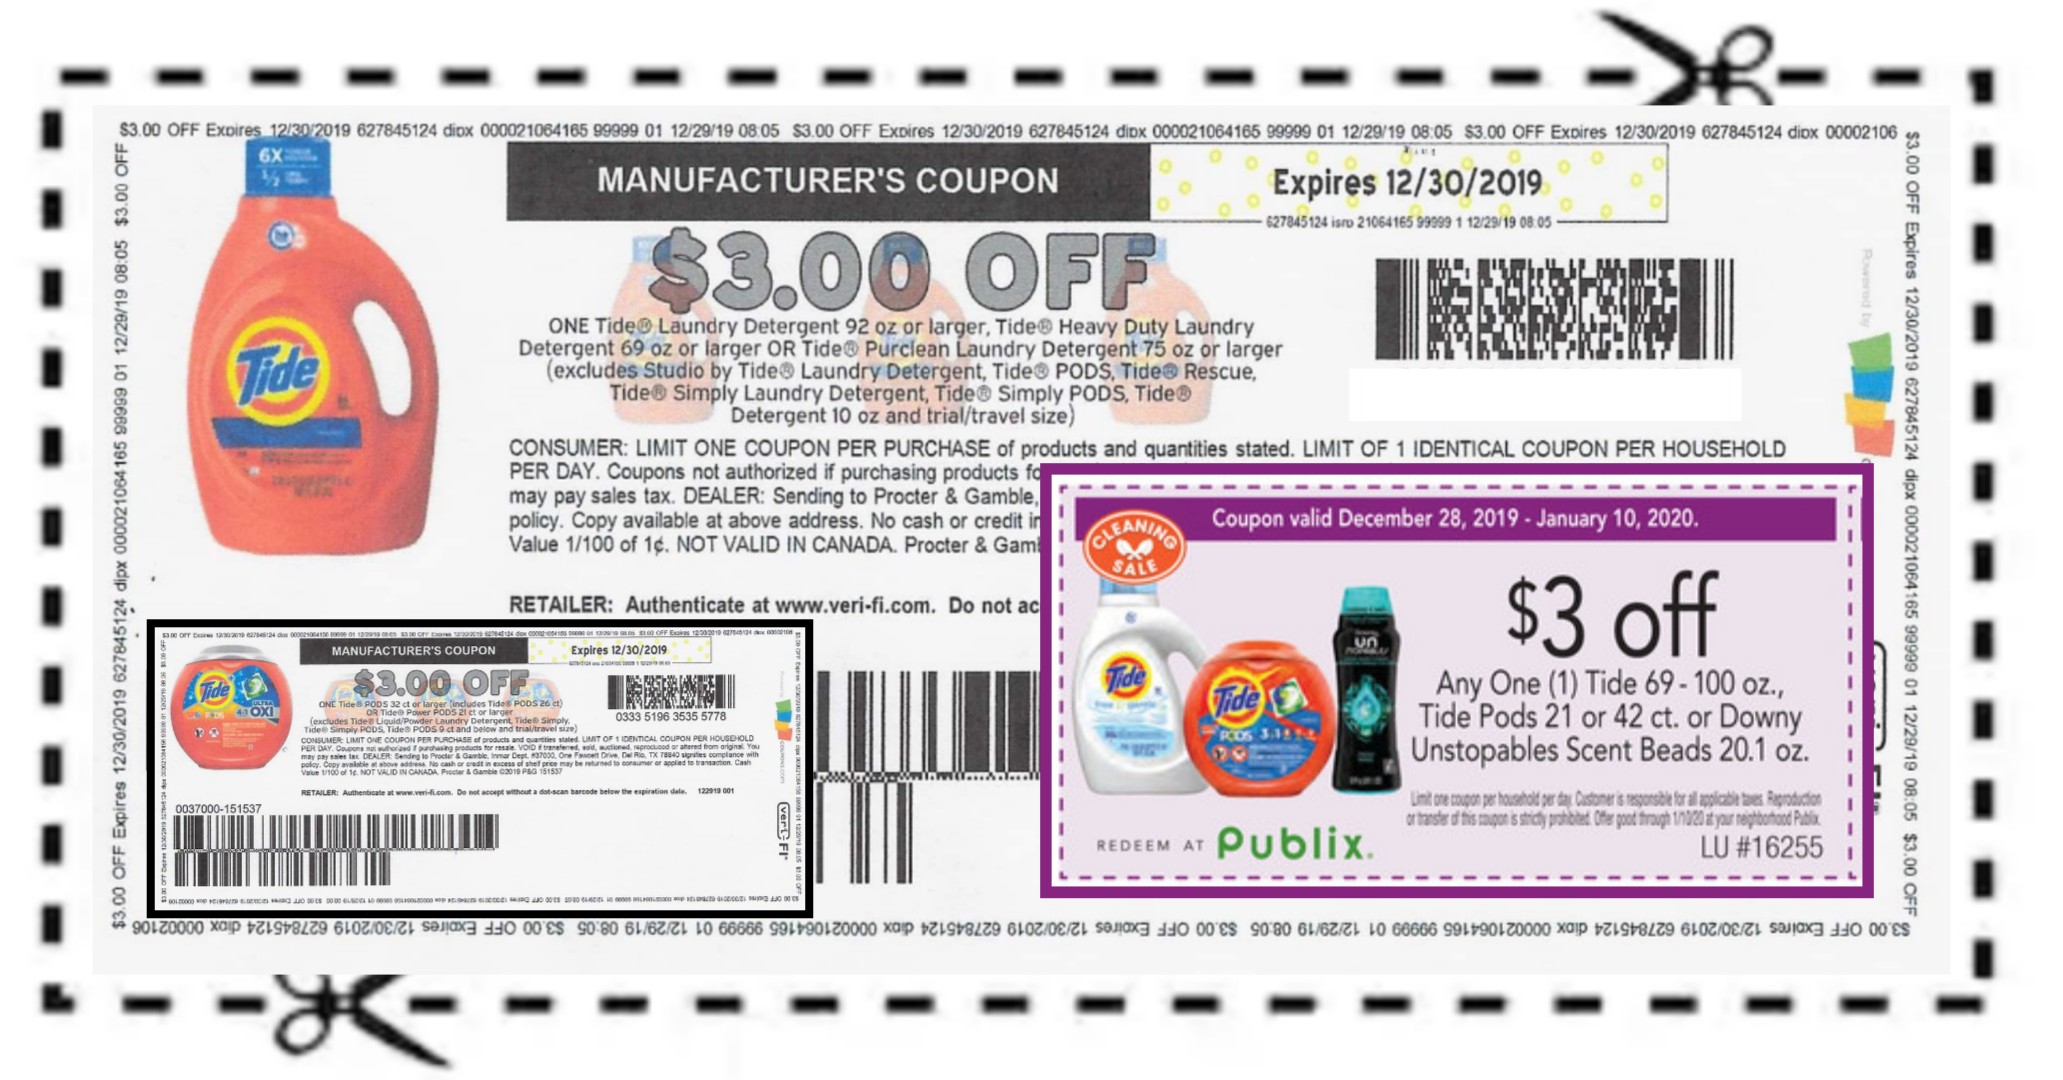 New 3/1 Tide or Downy Coupons Stack with 3/1 Publix Coupon